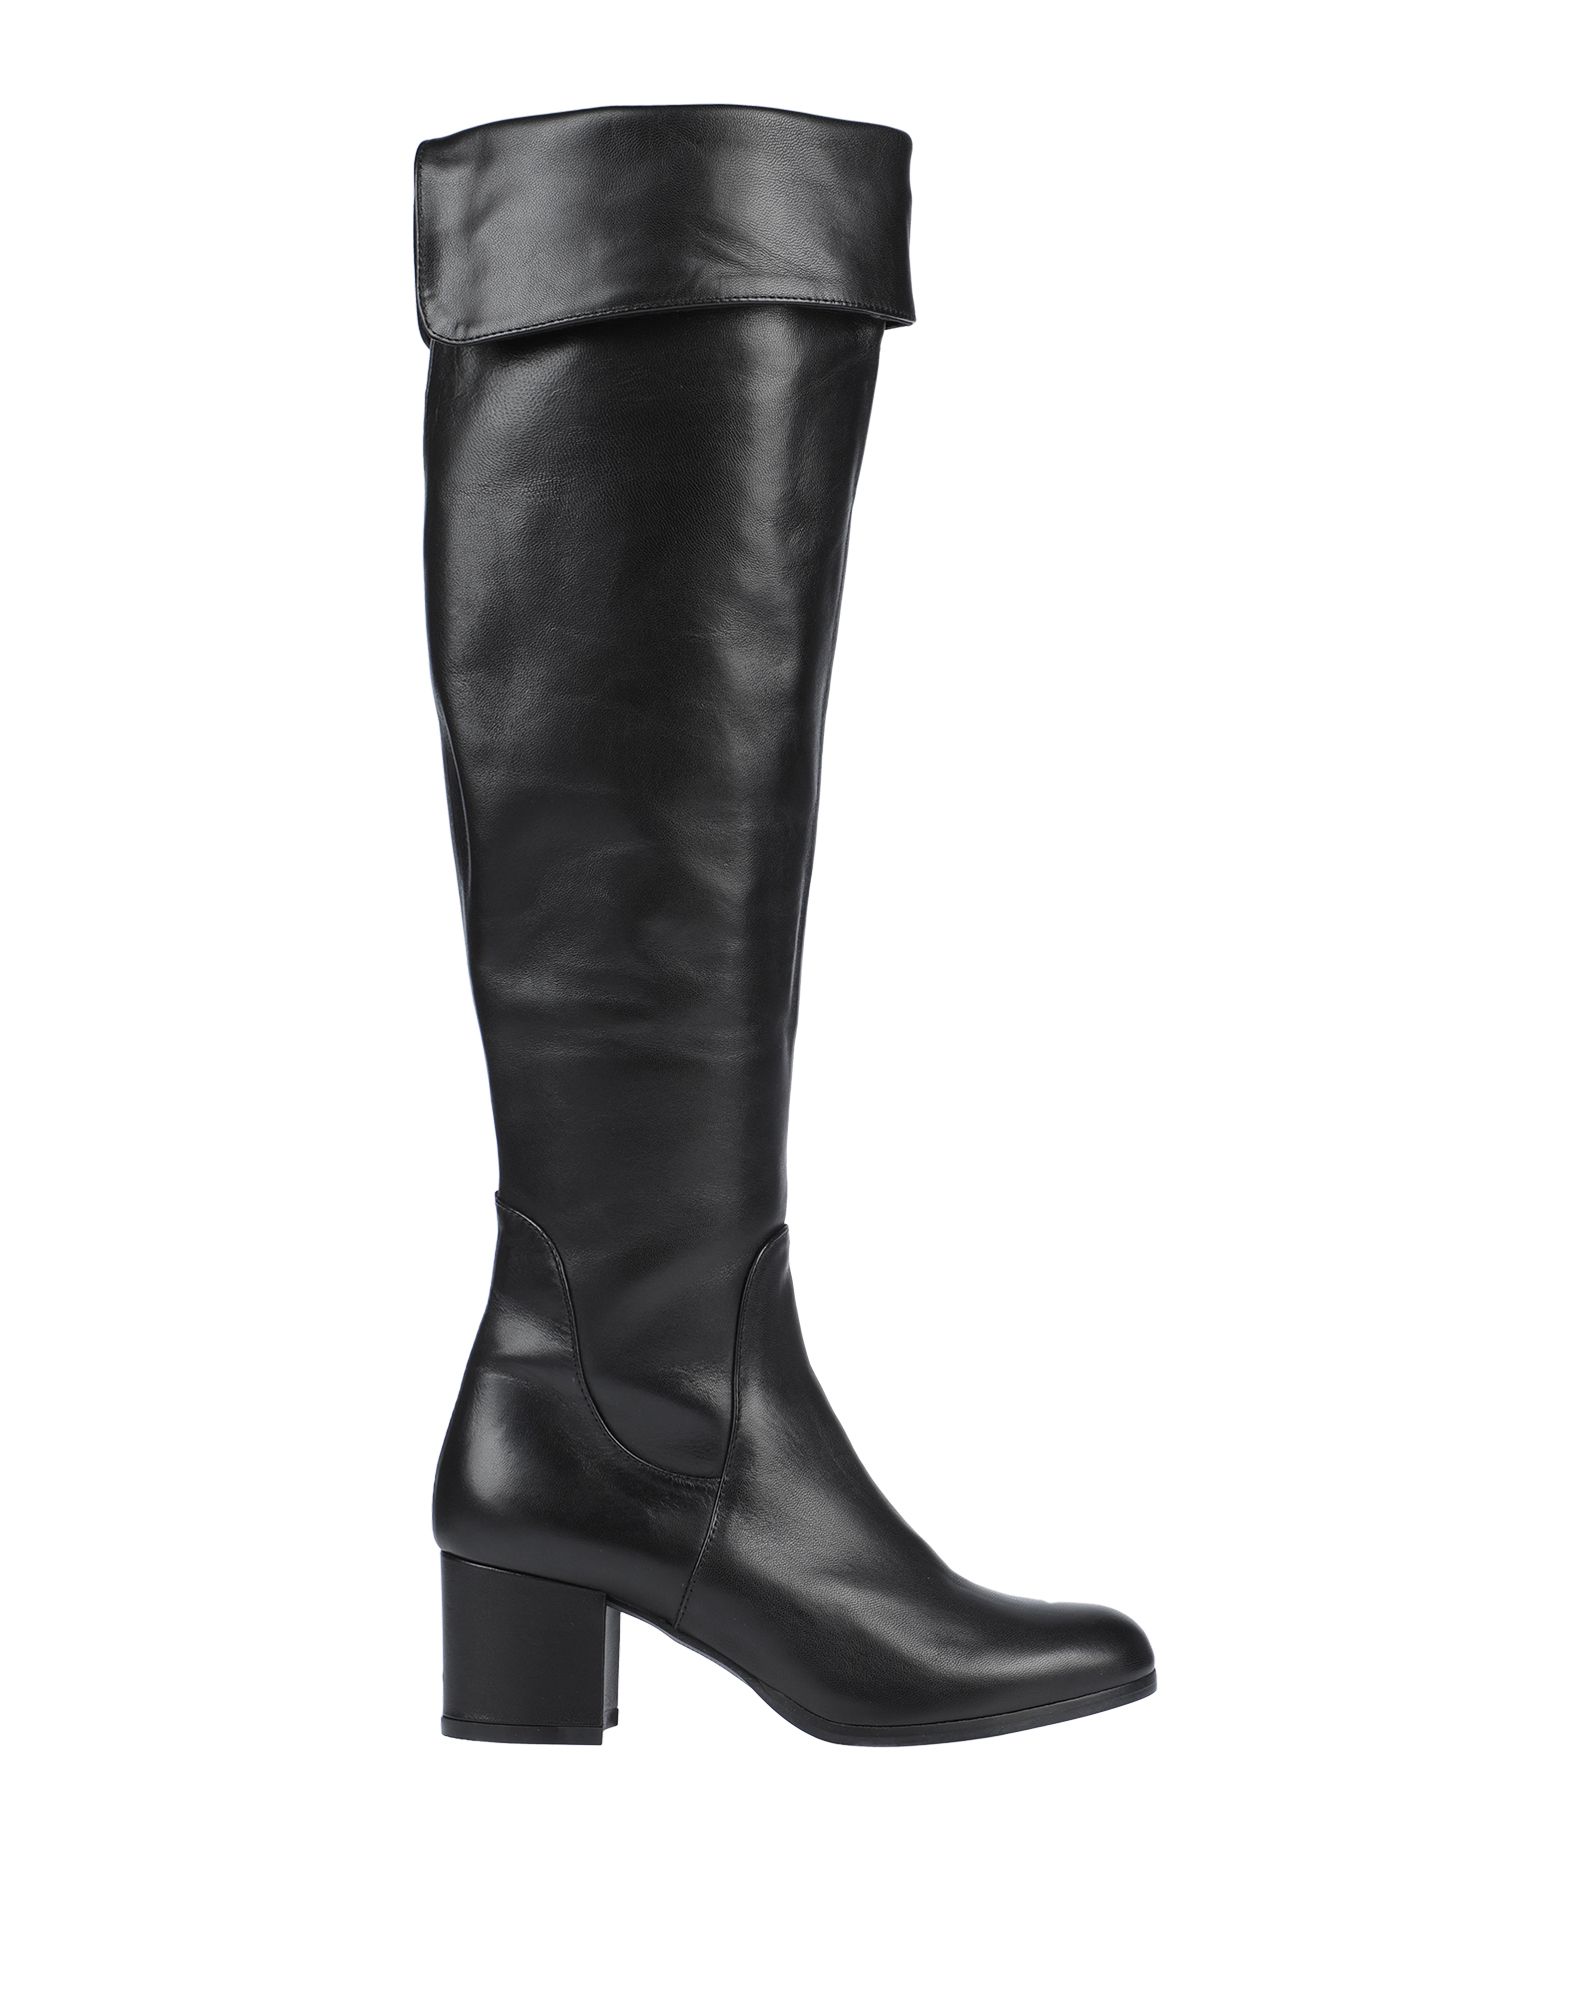 L'AMOUR by ALBANO Knee boots